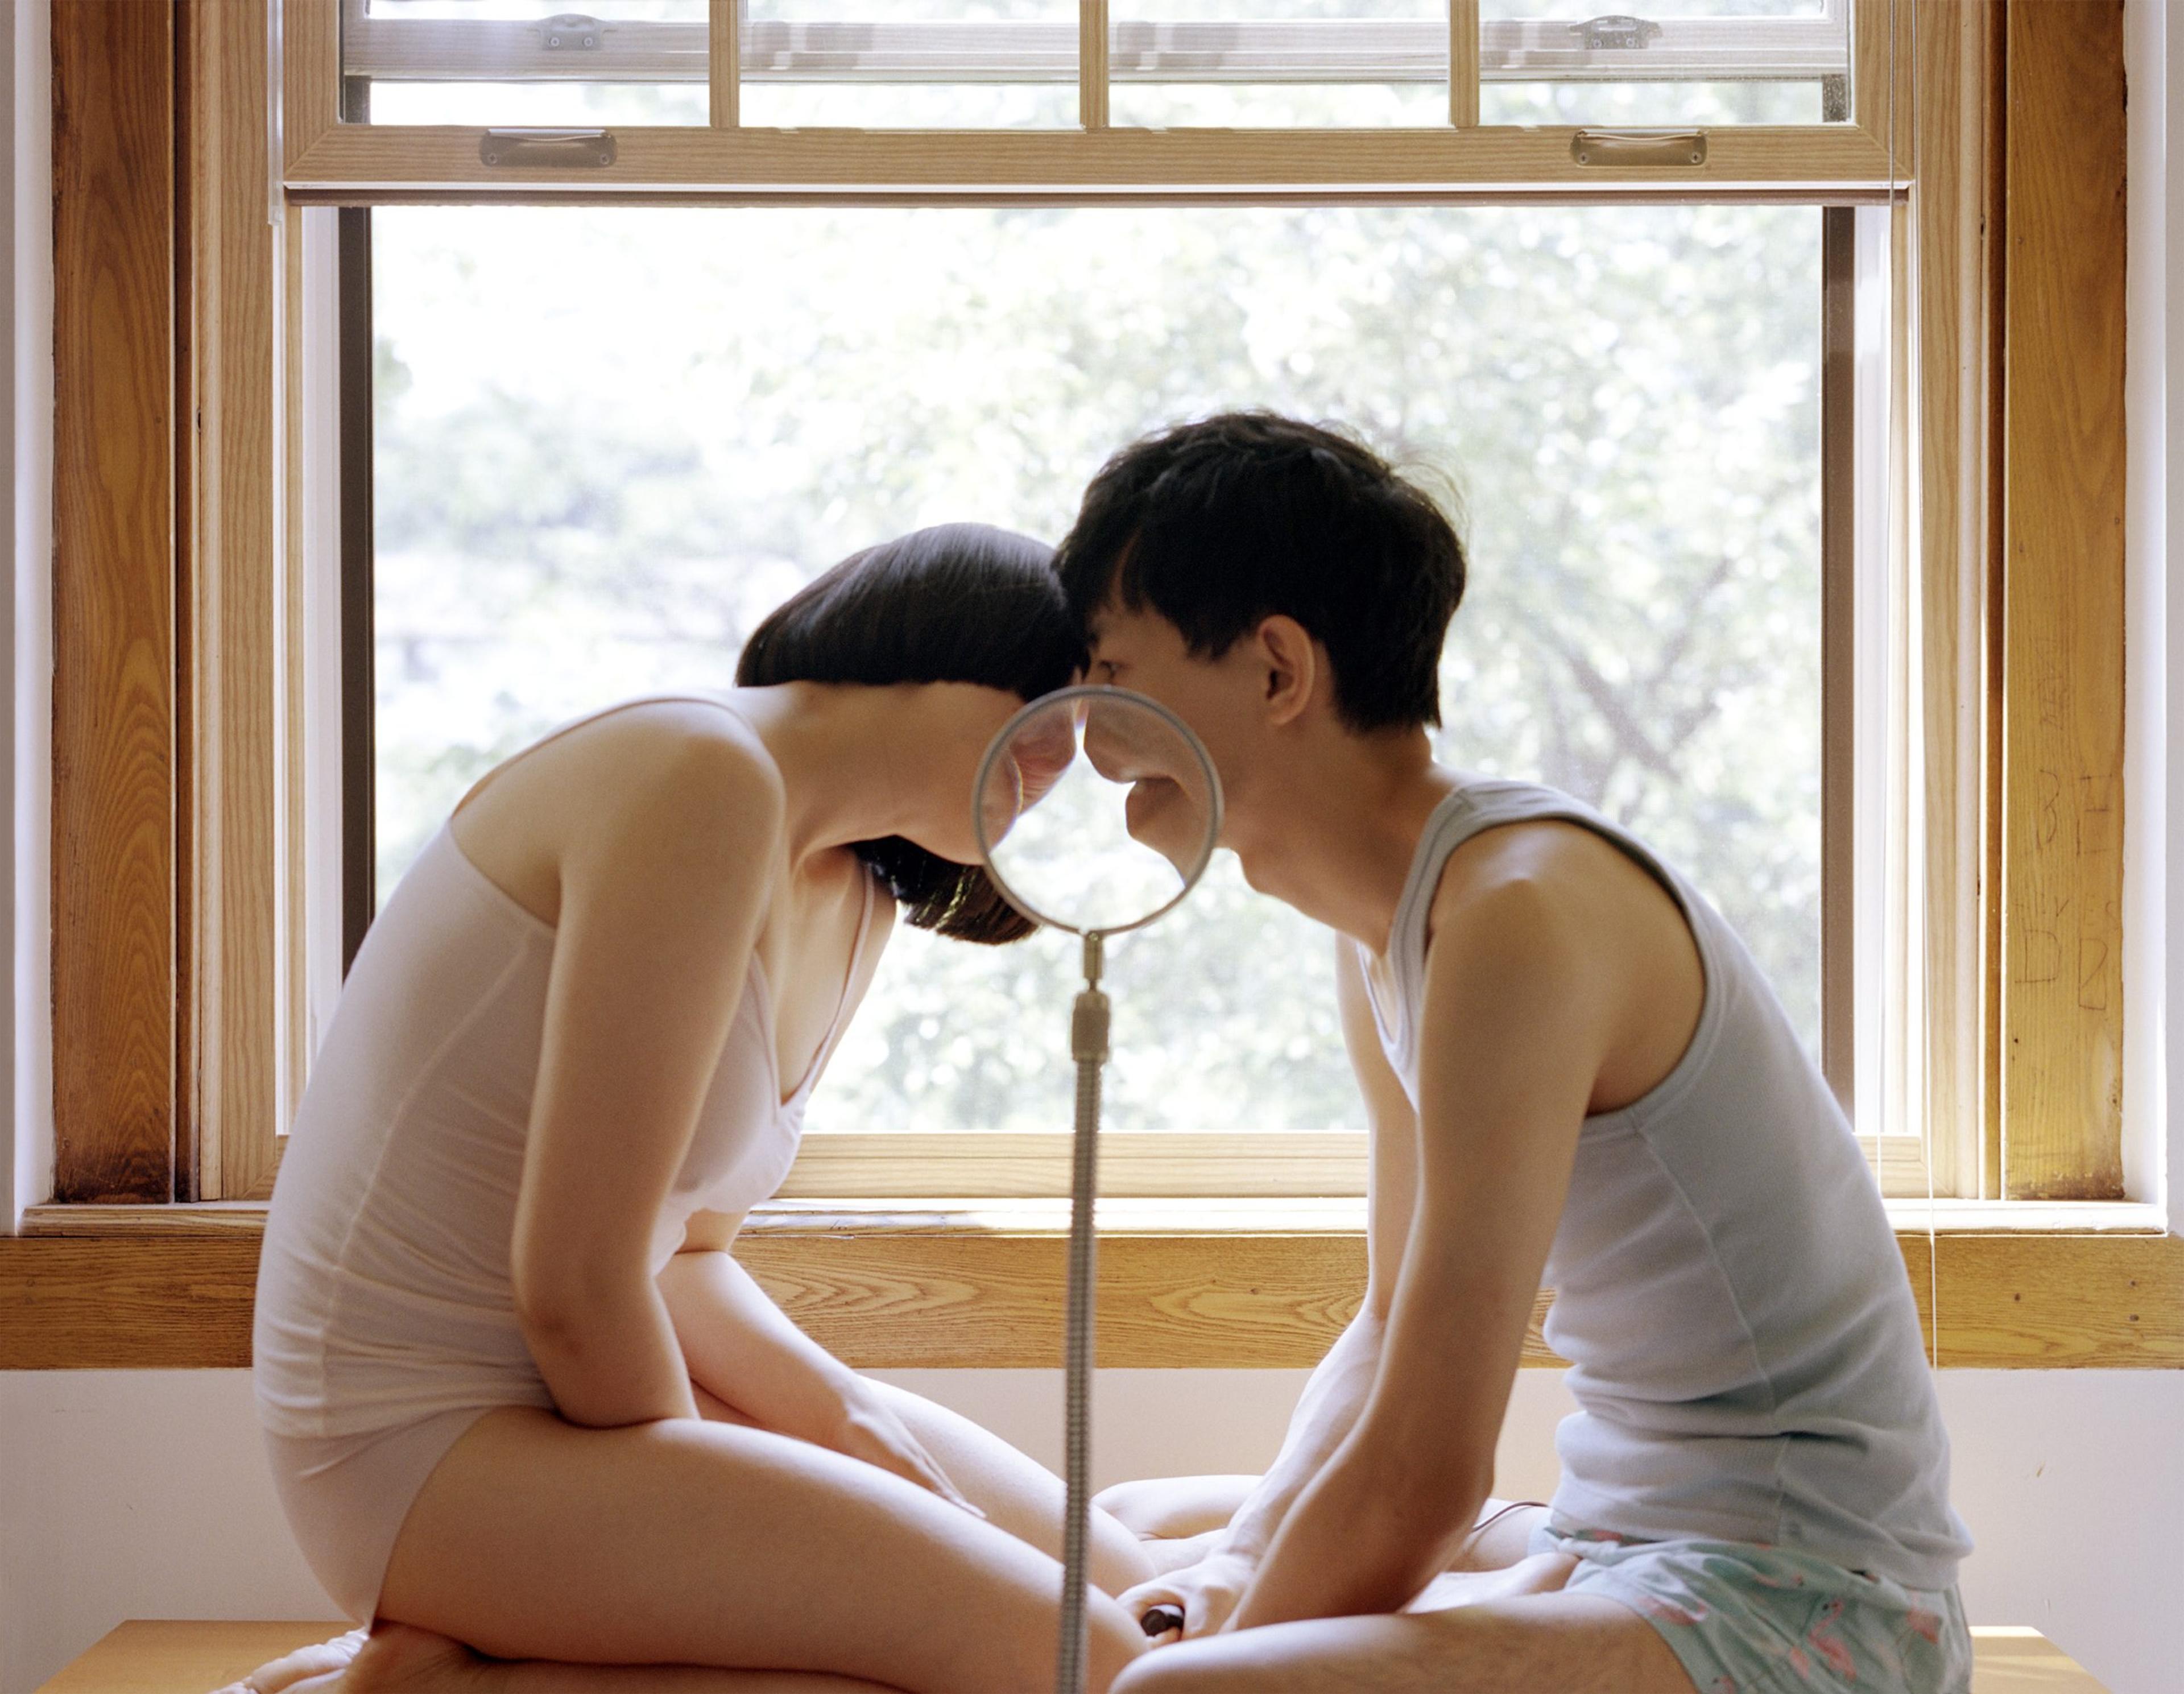 An image of a couple in pajamas kissing behind a magnifying glass